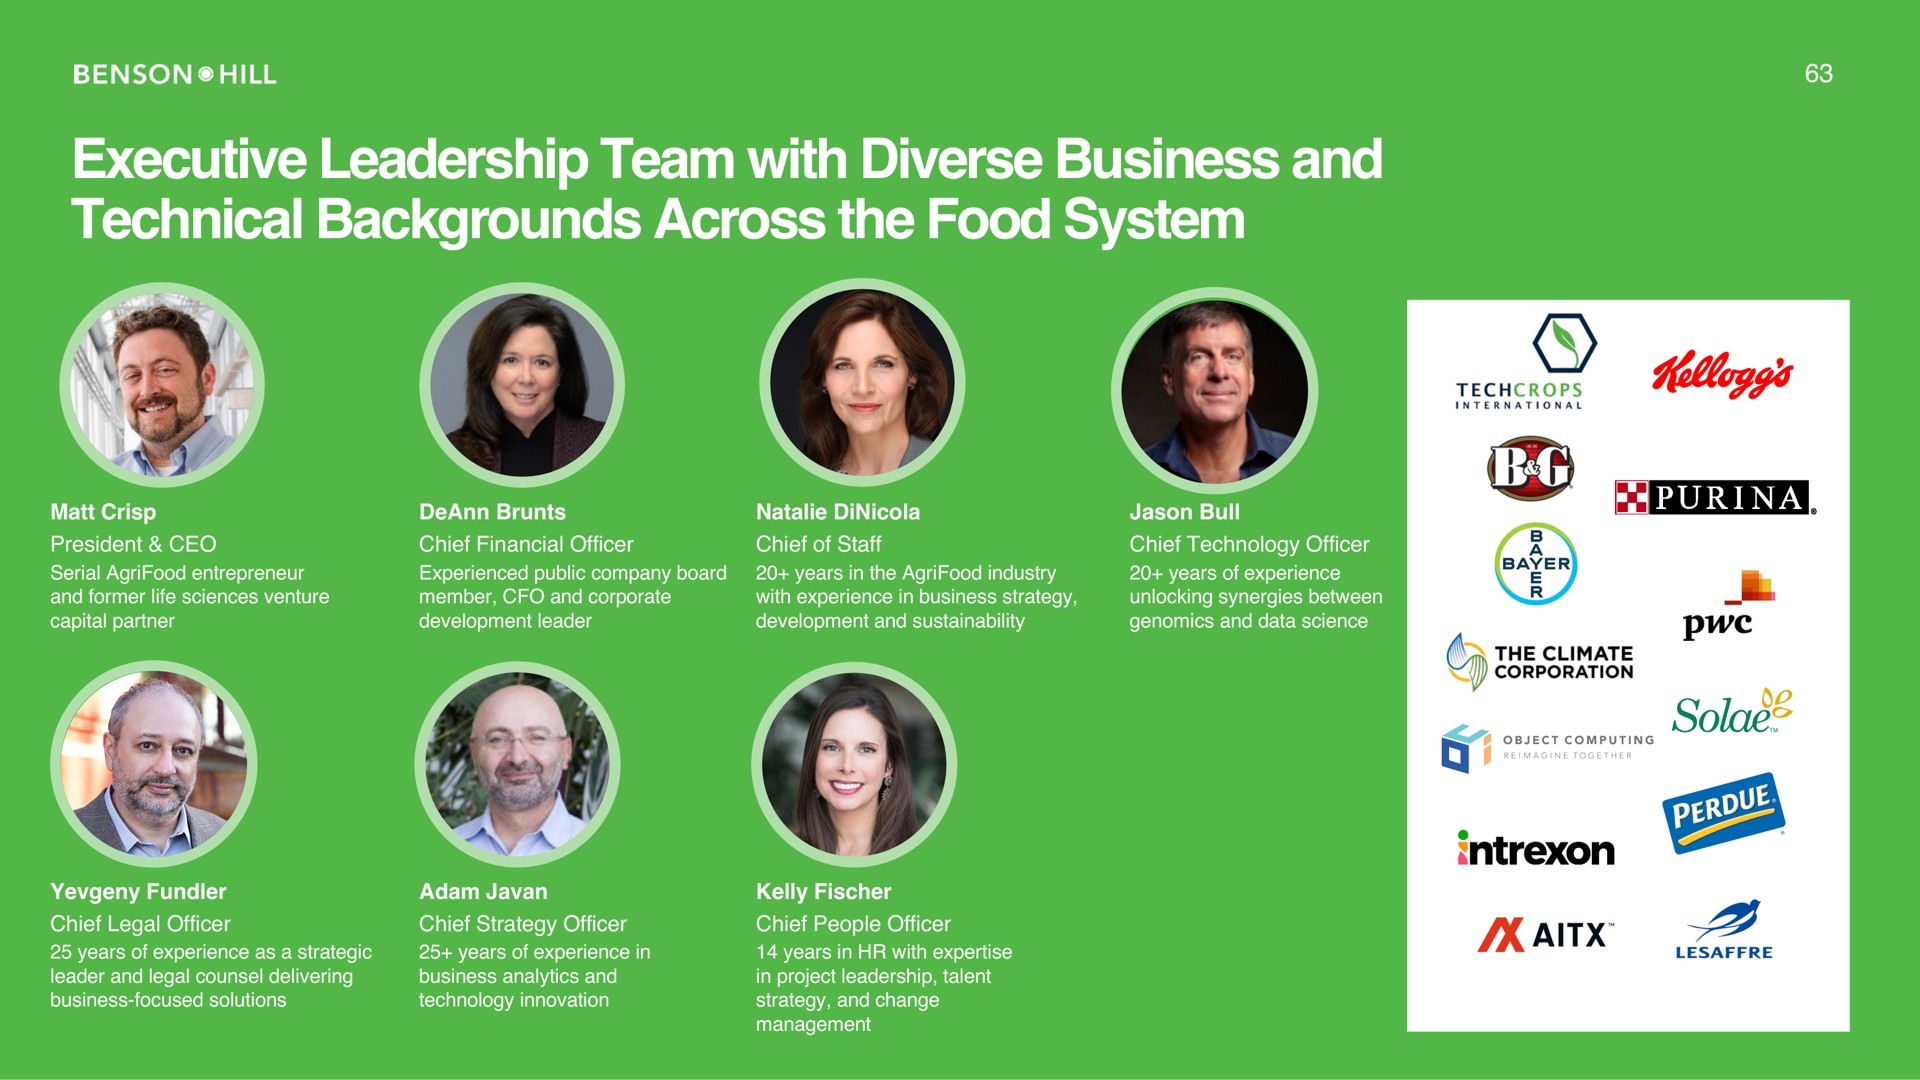 executive leadership team with diverse business and technical backgrounds across the food system scene | Benson Hill